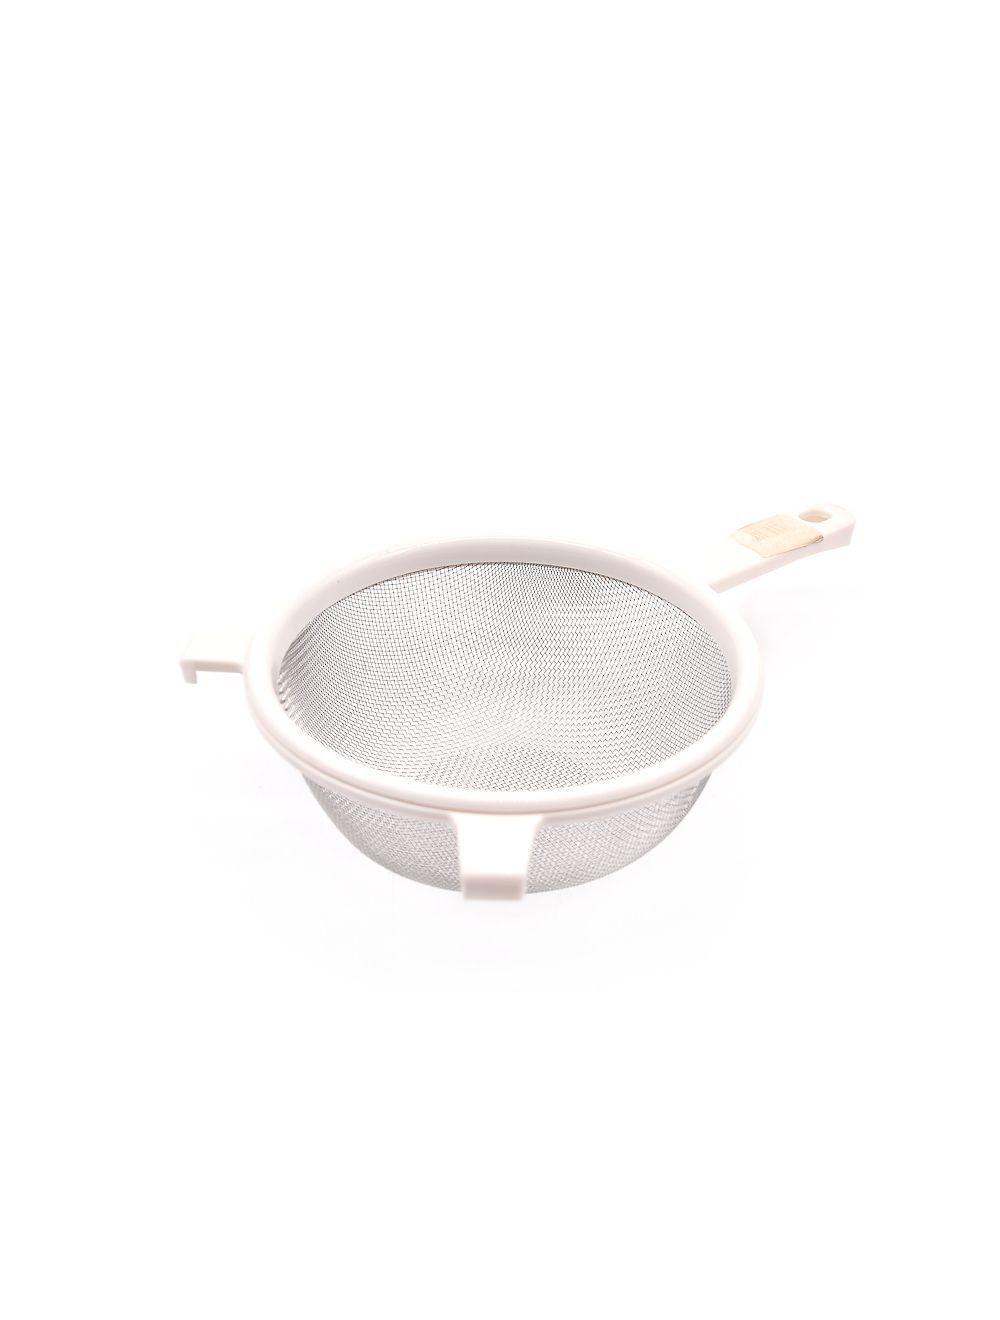 Stainless Steel Strainer With Plain Handle 16 cm